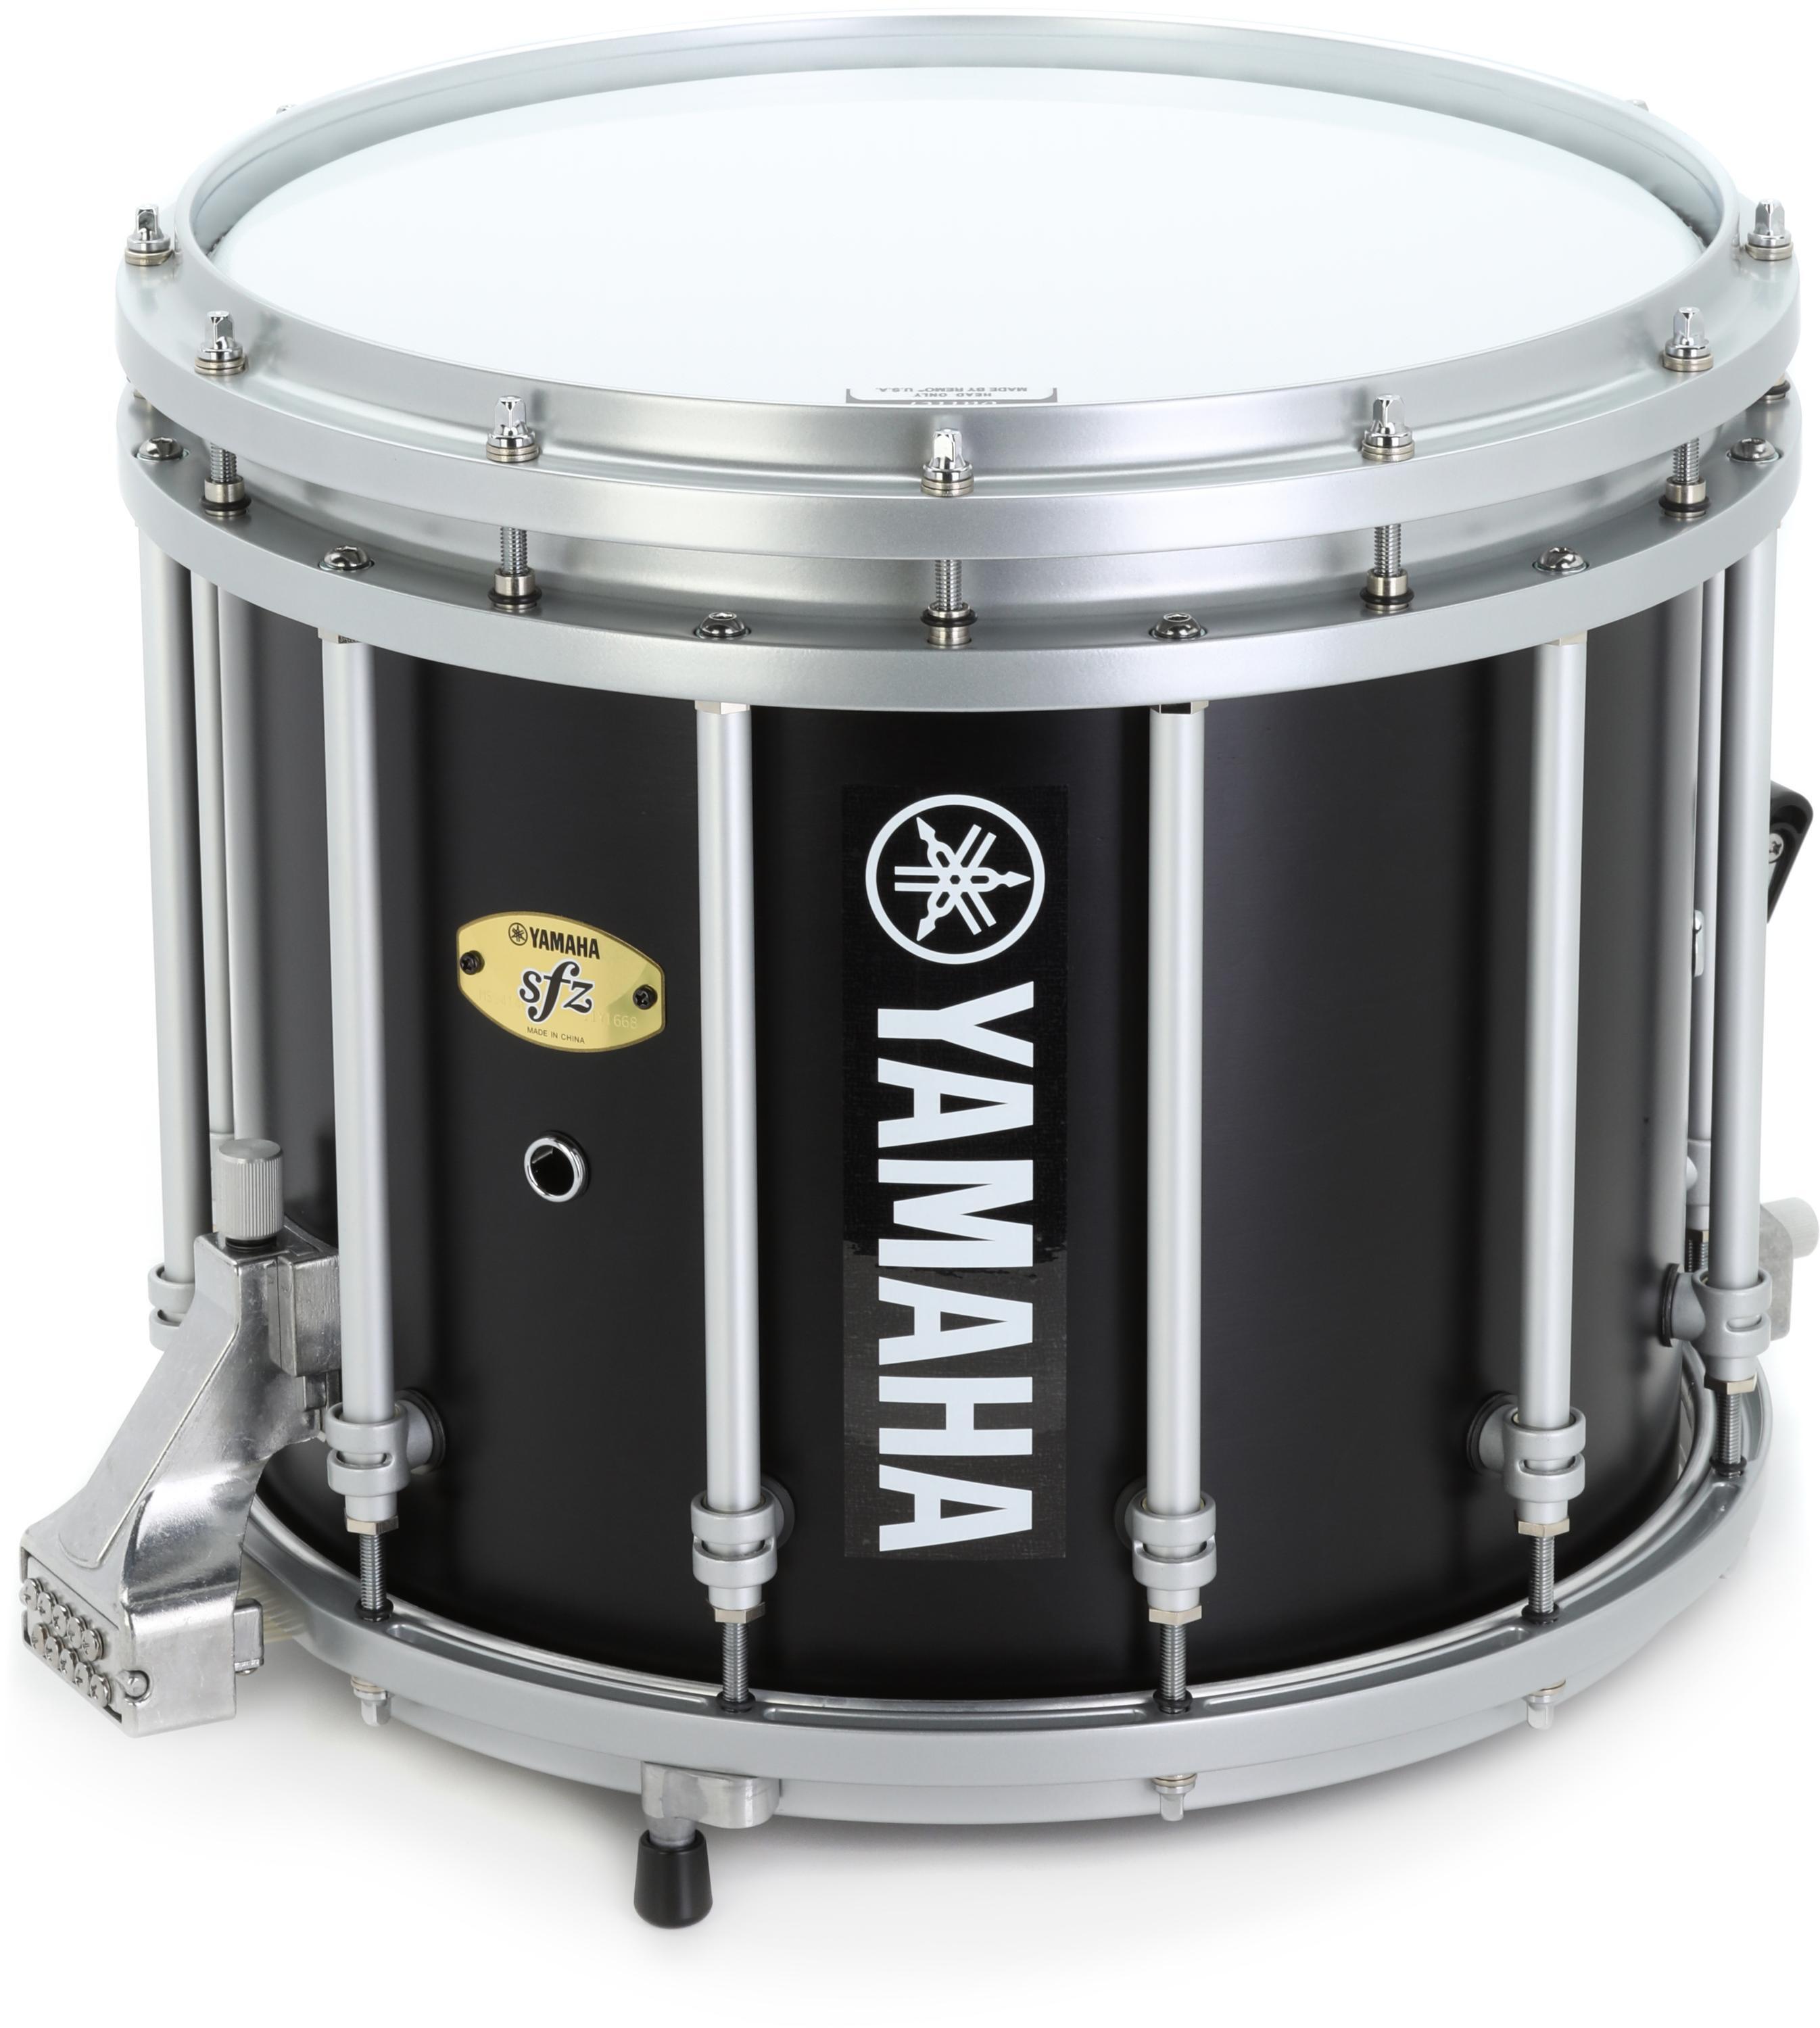 Yamaha MS-9414 14-inch x 12-inch SFZ Marching Snare Drum with